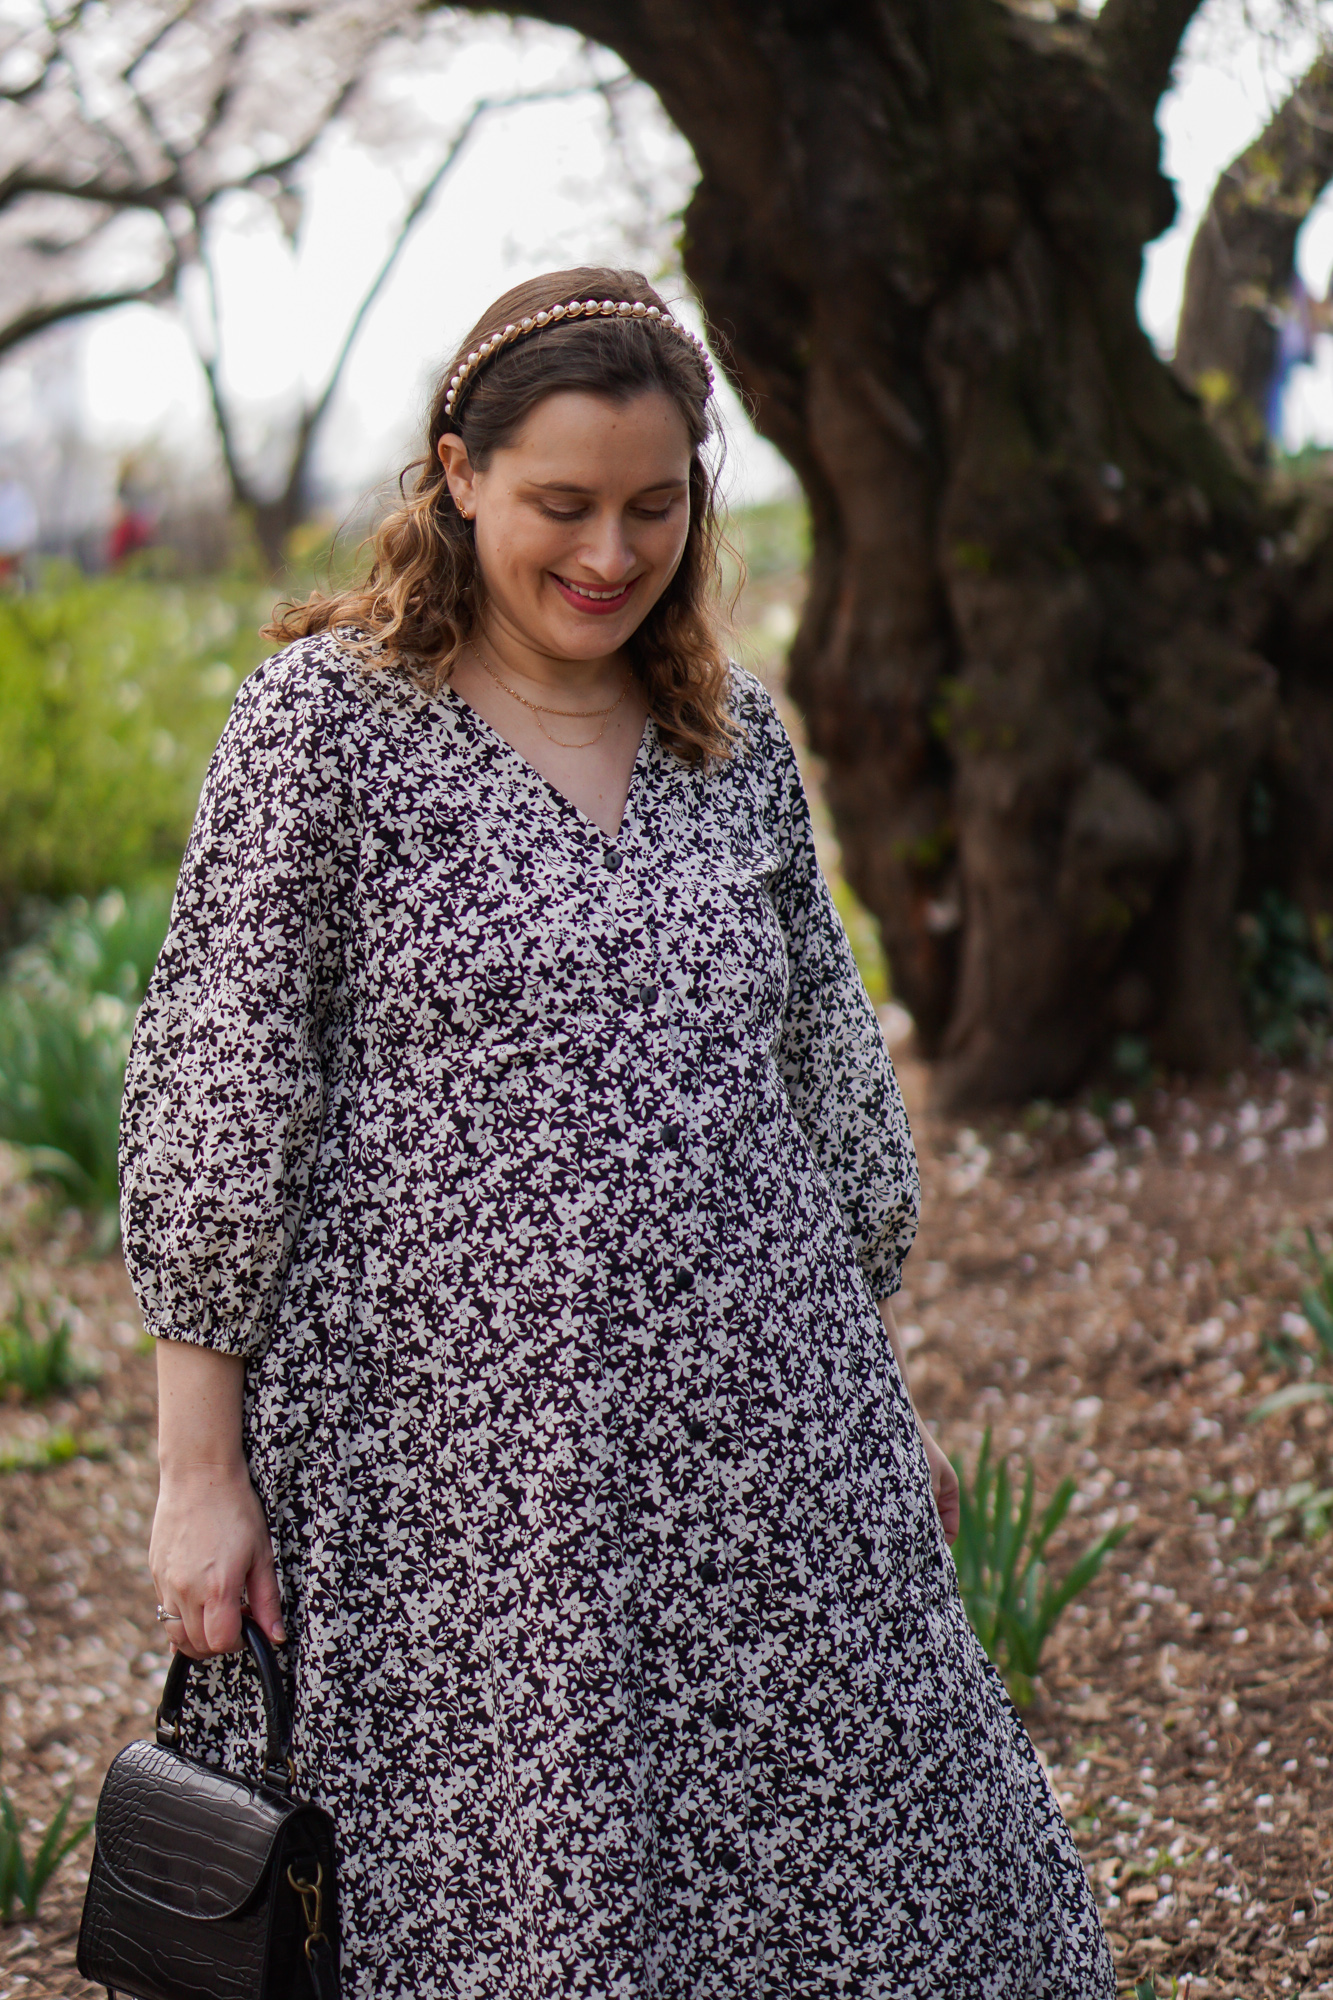 Maternity style for spring